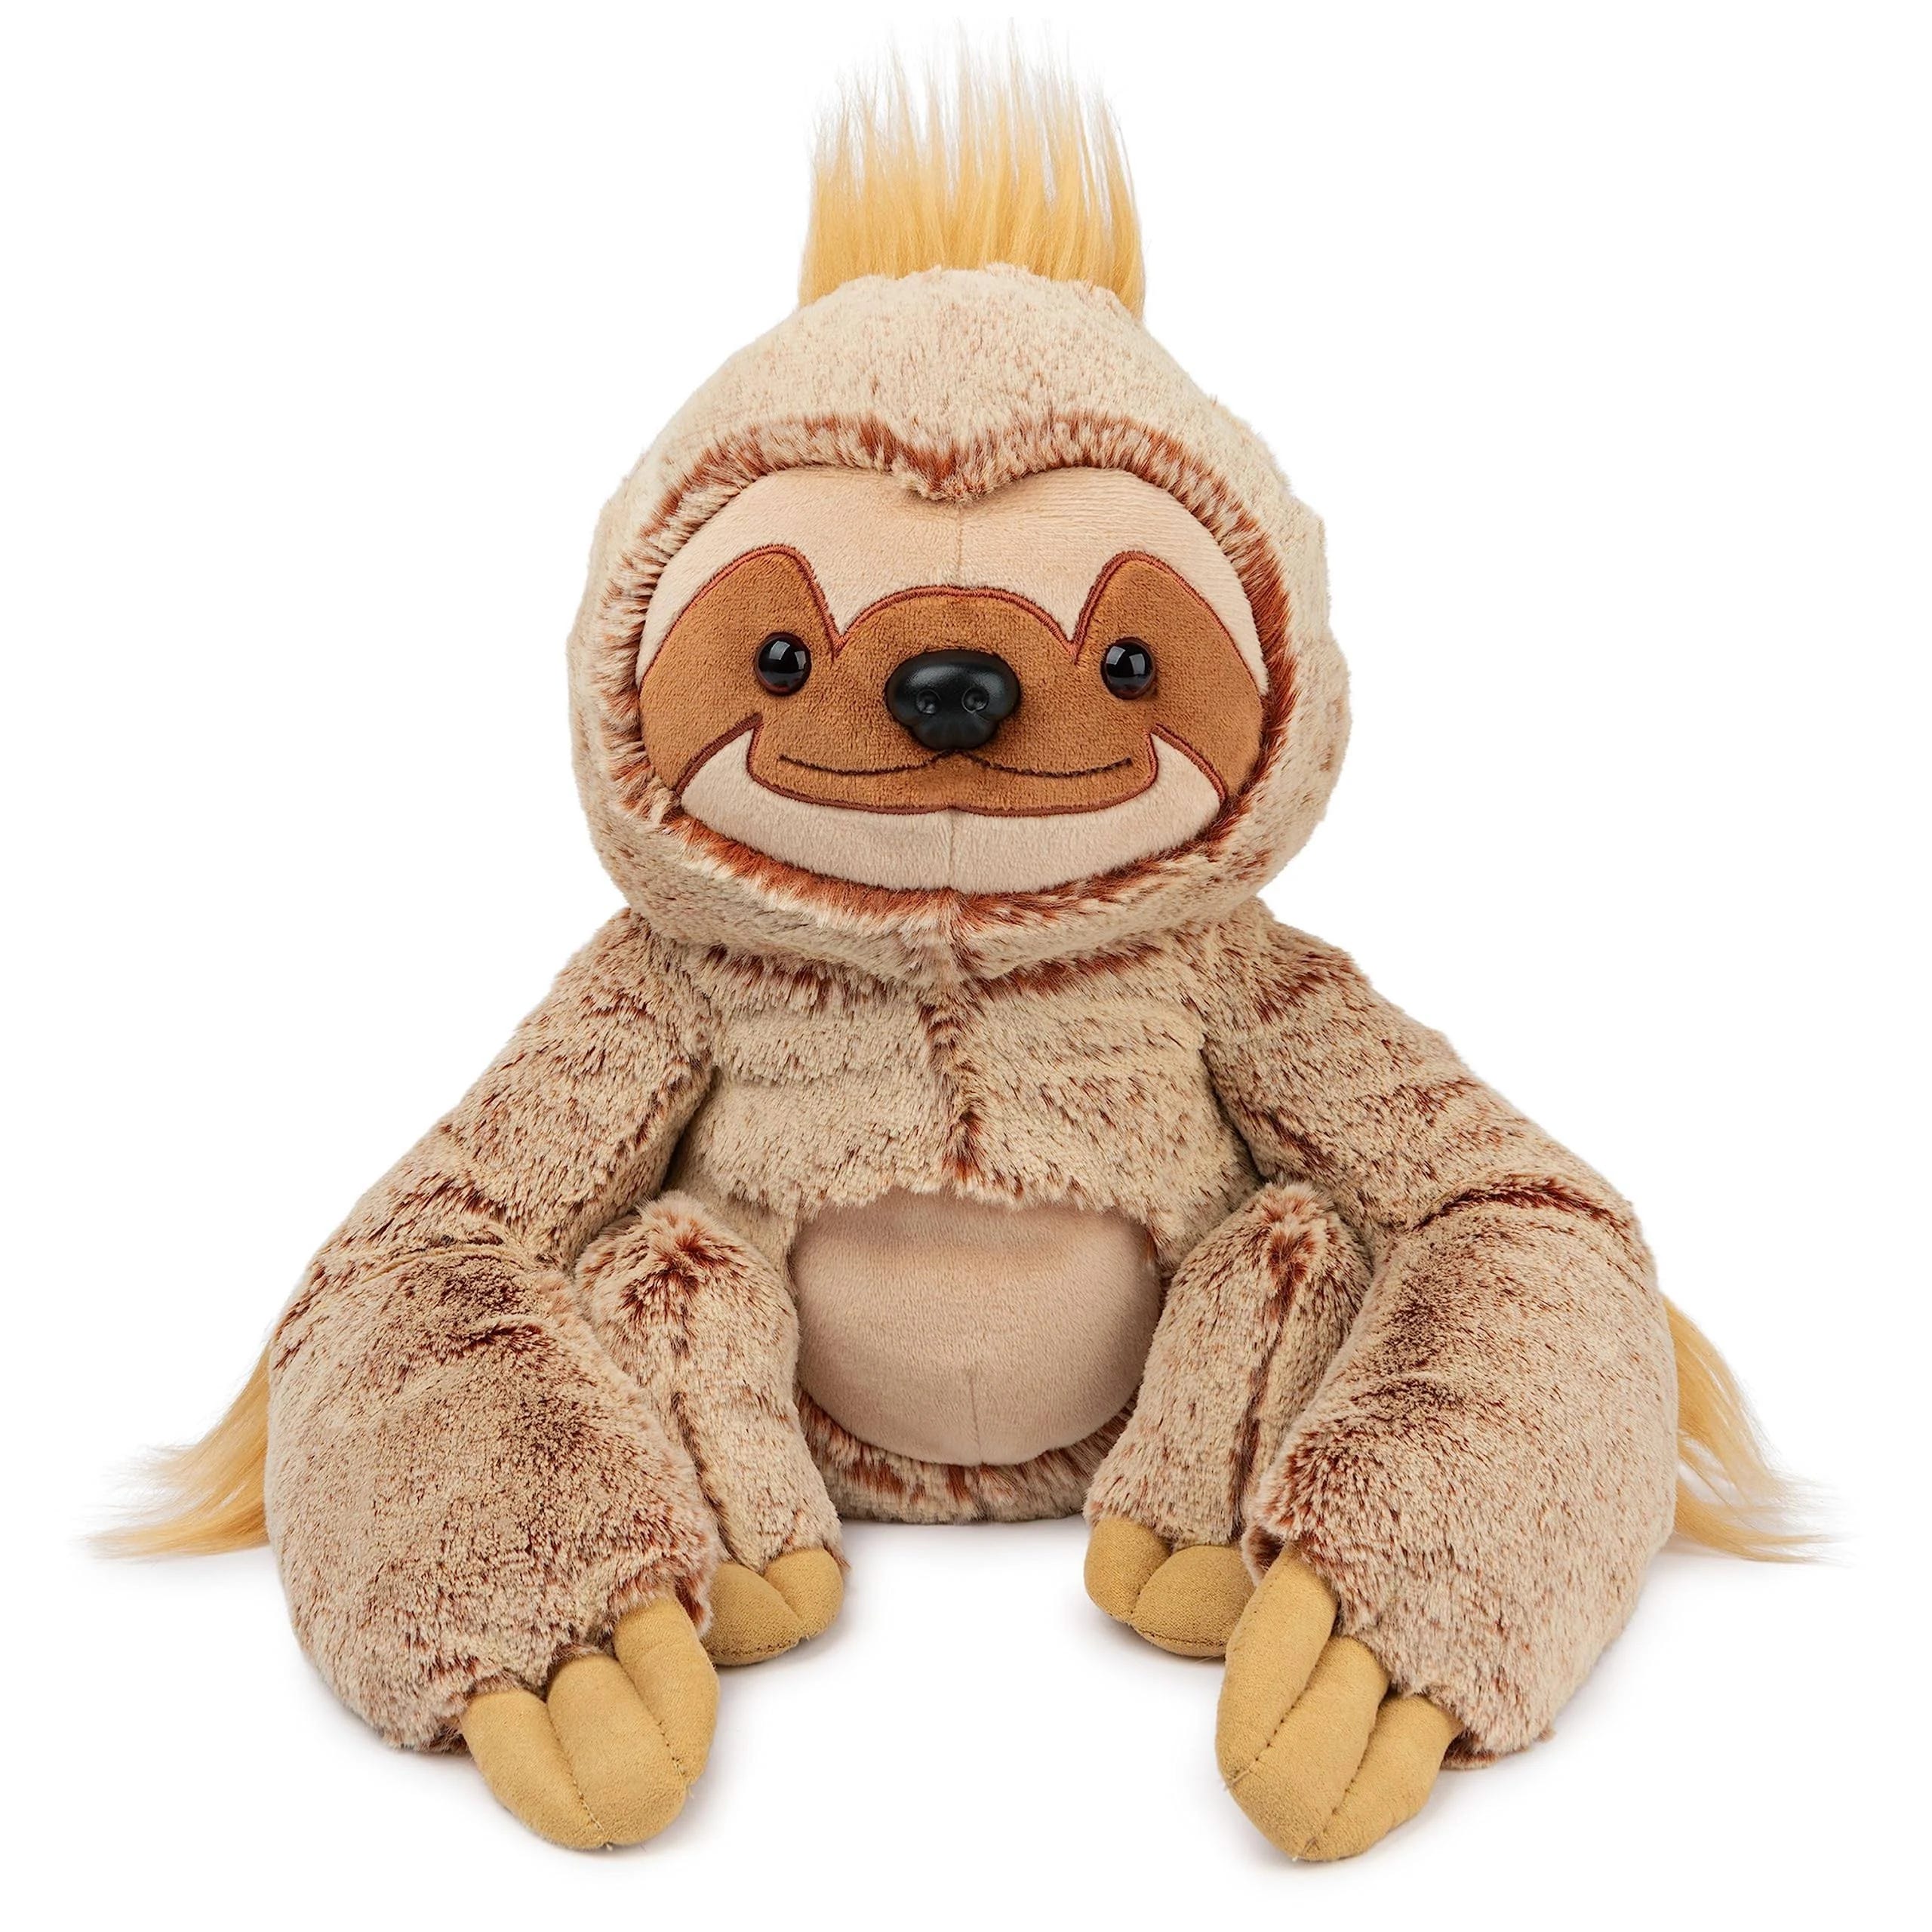 Adorable, Huggable Sloth Plush Toy with Extra-Long Arms for Collectors | Image